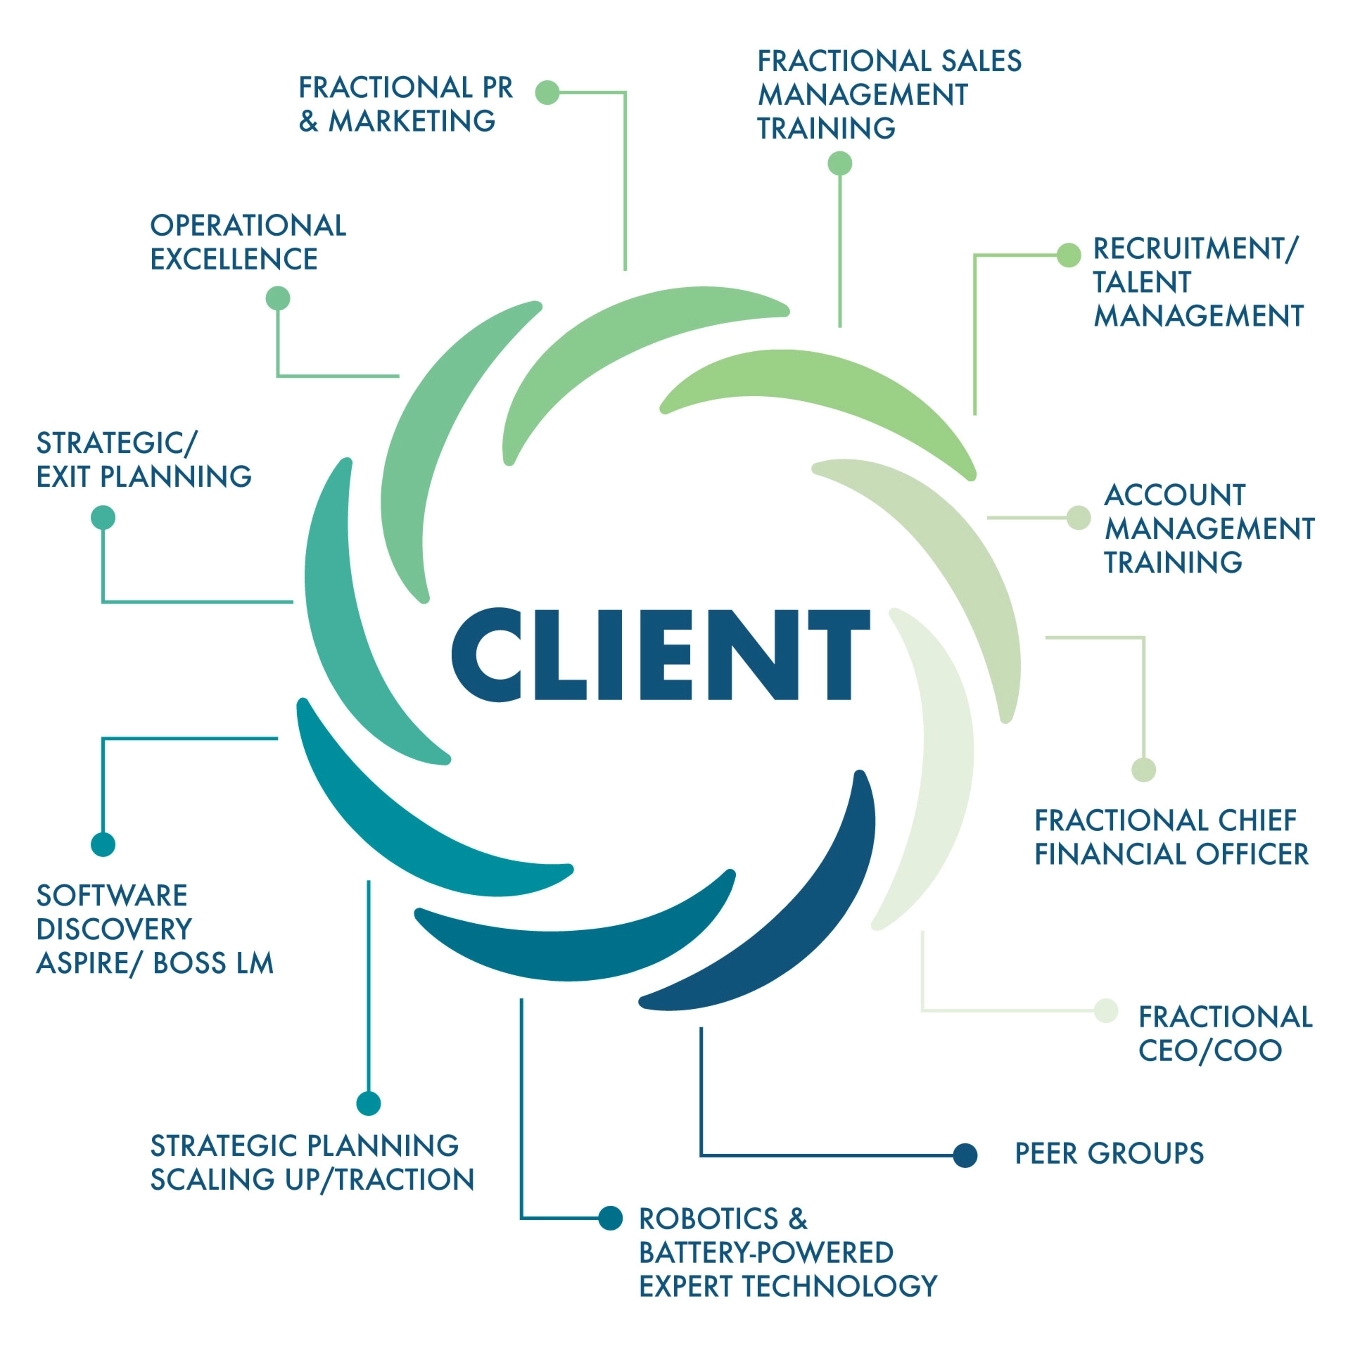 Image of a diagram of a swirl with the word "client" in the center, surrounded by lines representing the company's services.